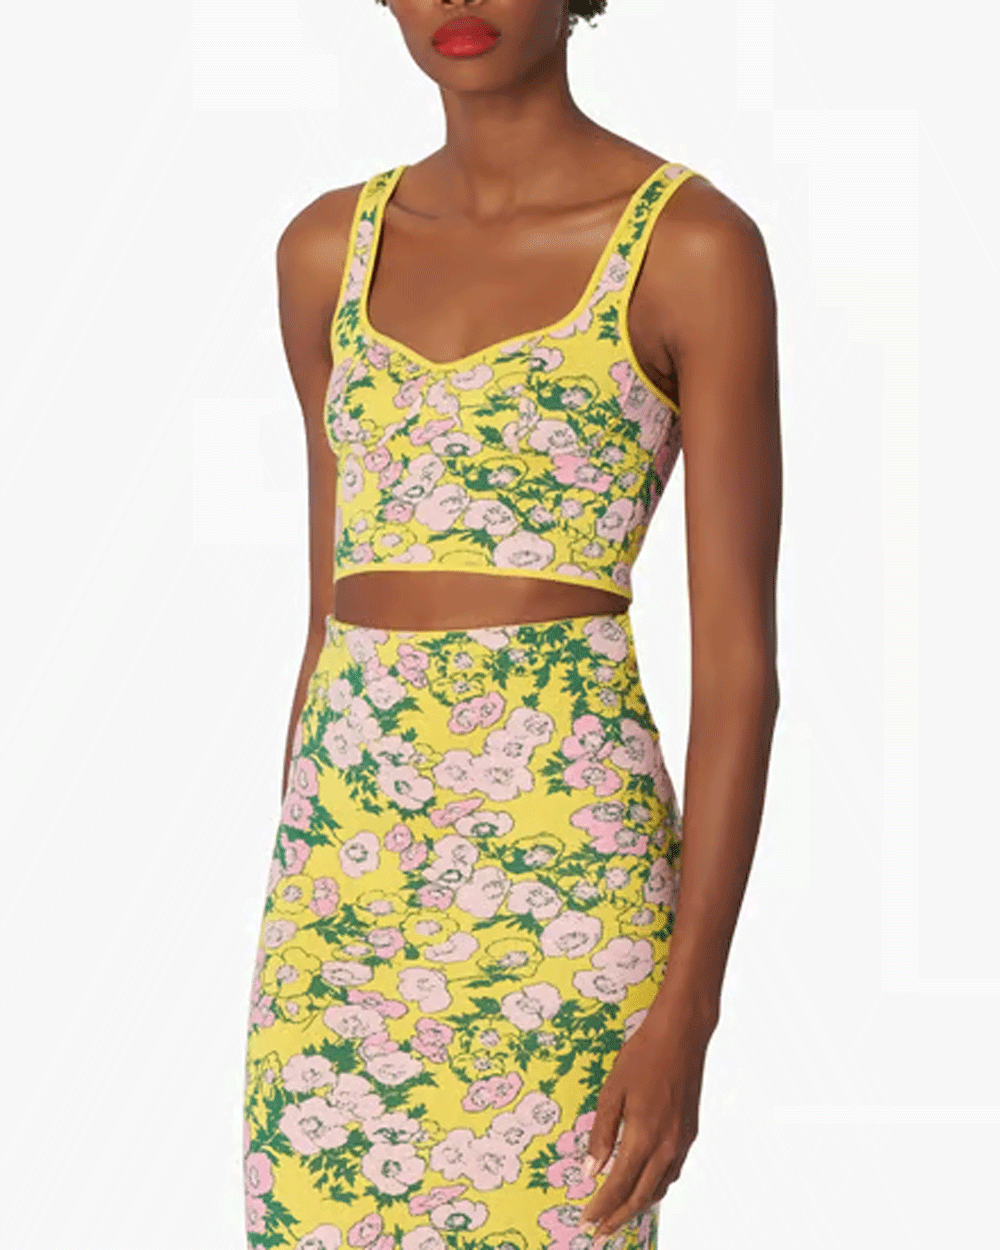 Taxi Cab Floral Jacquard Bustier Cropped Blouse